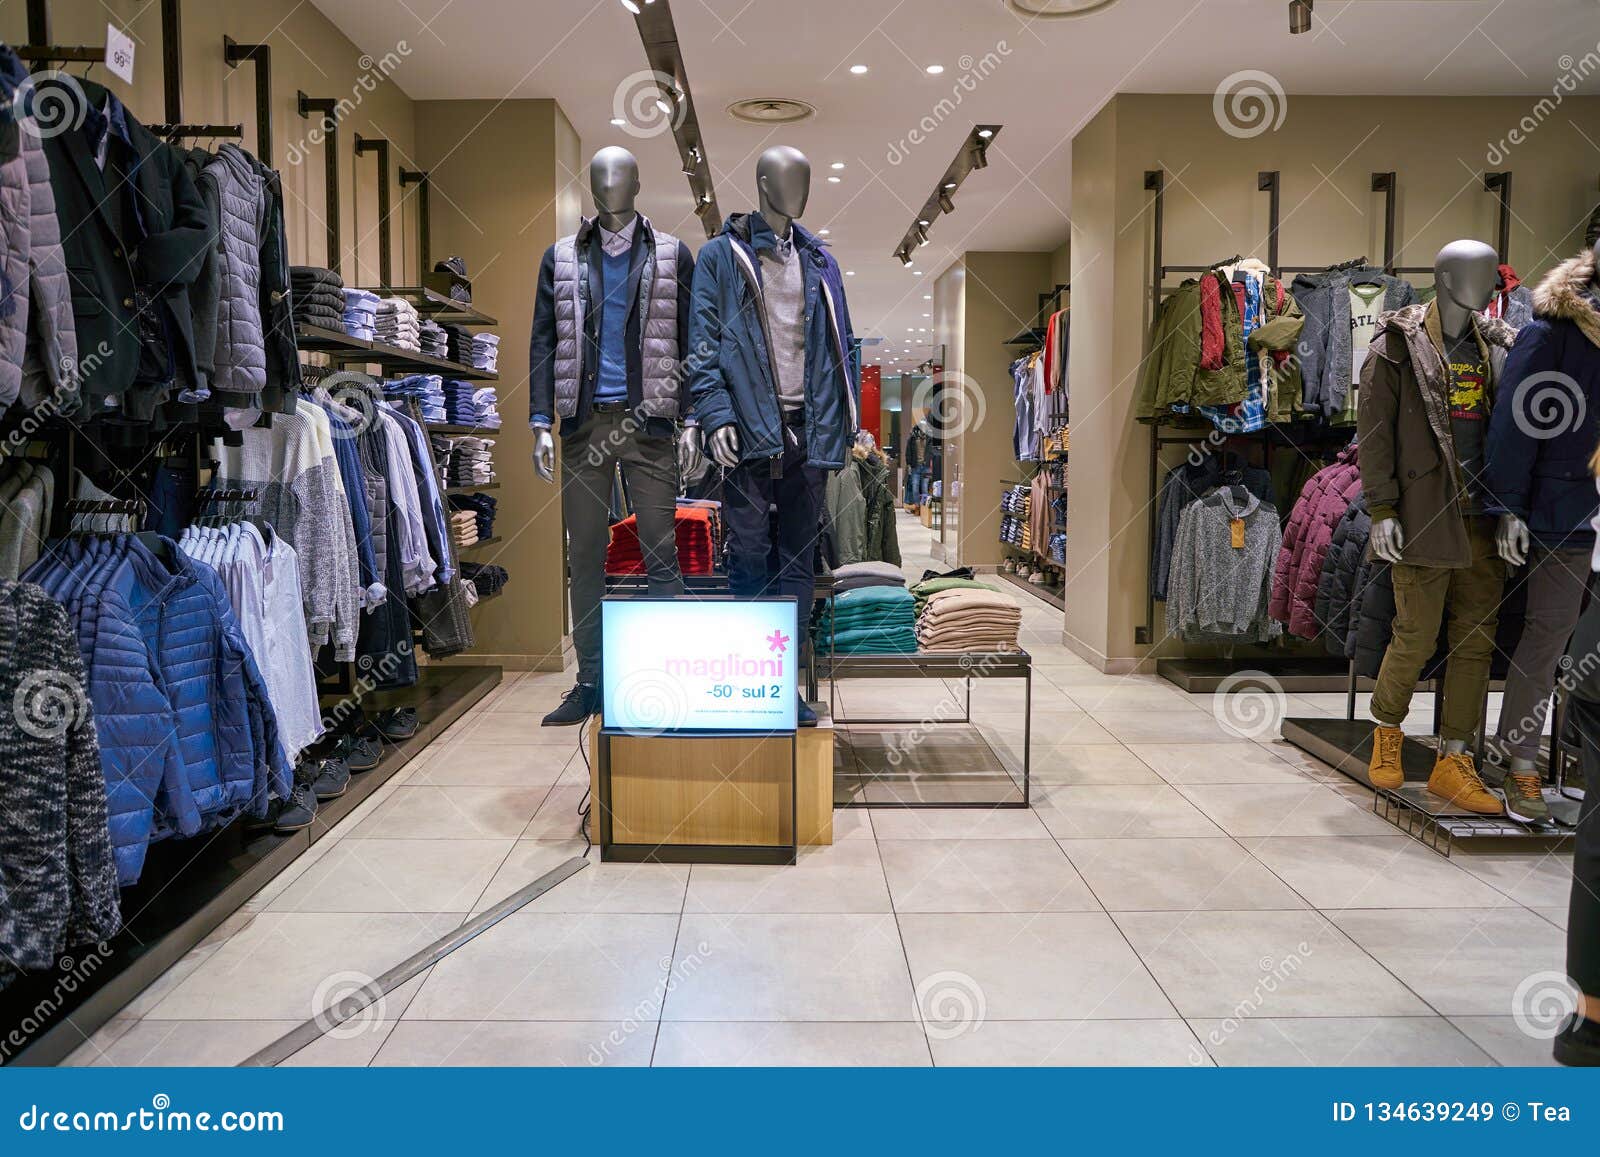 Clothing retail store editorial stock image. Image of business - 134639249